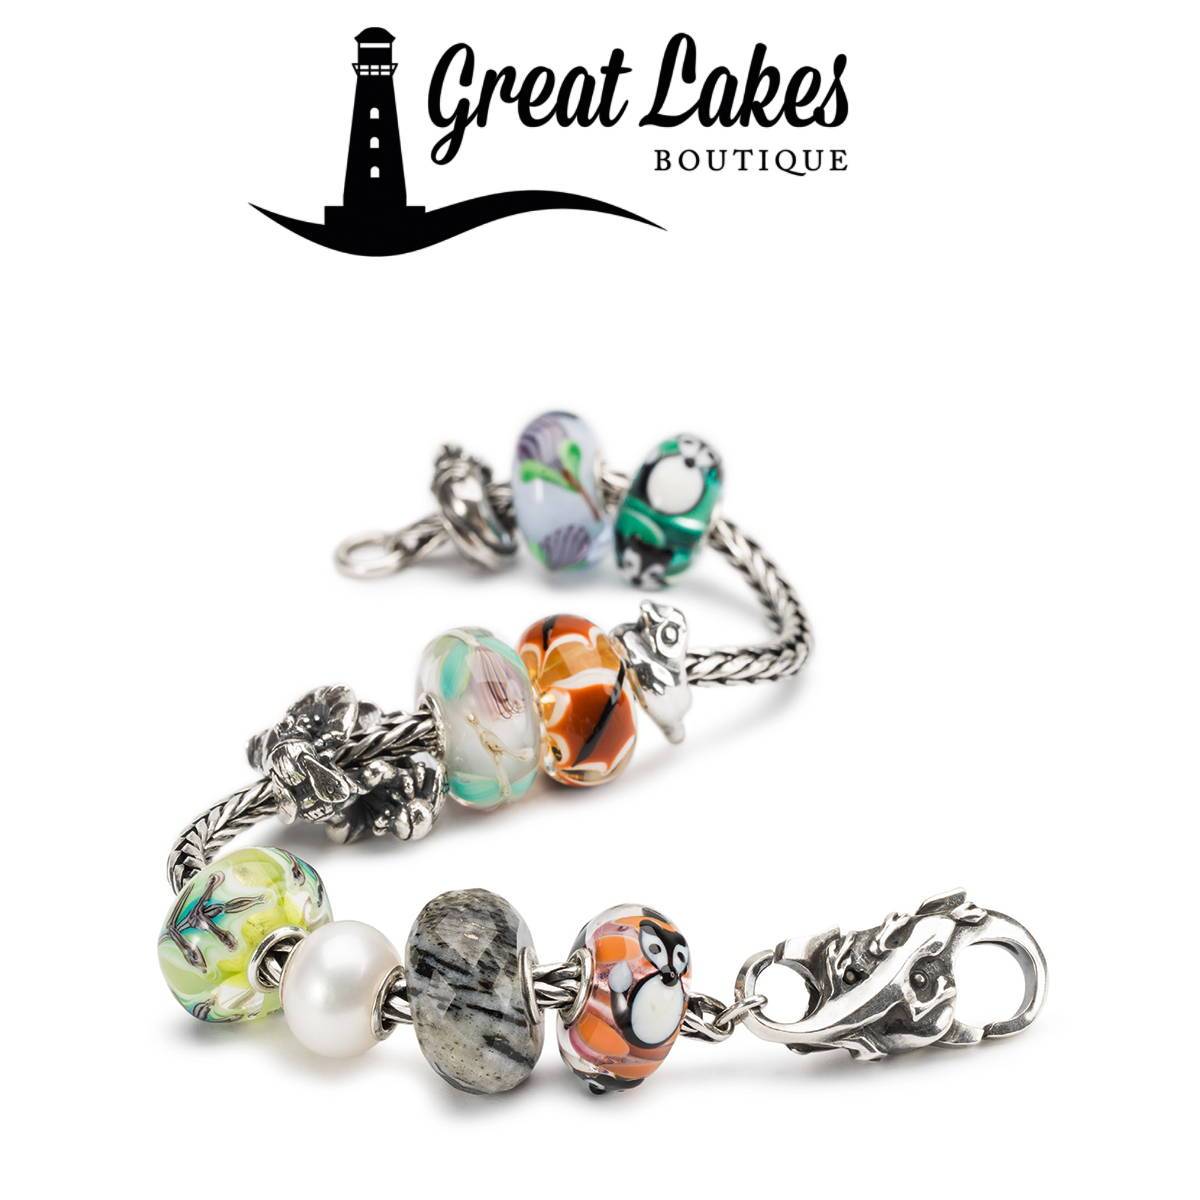 Trollbeads Fall 2020 Preview